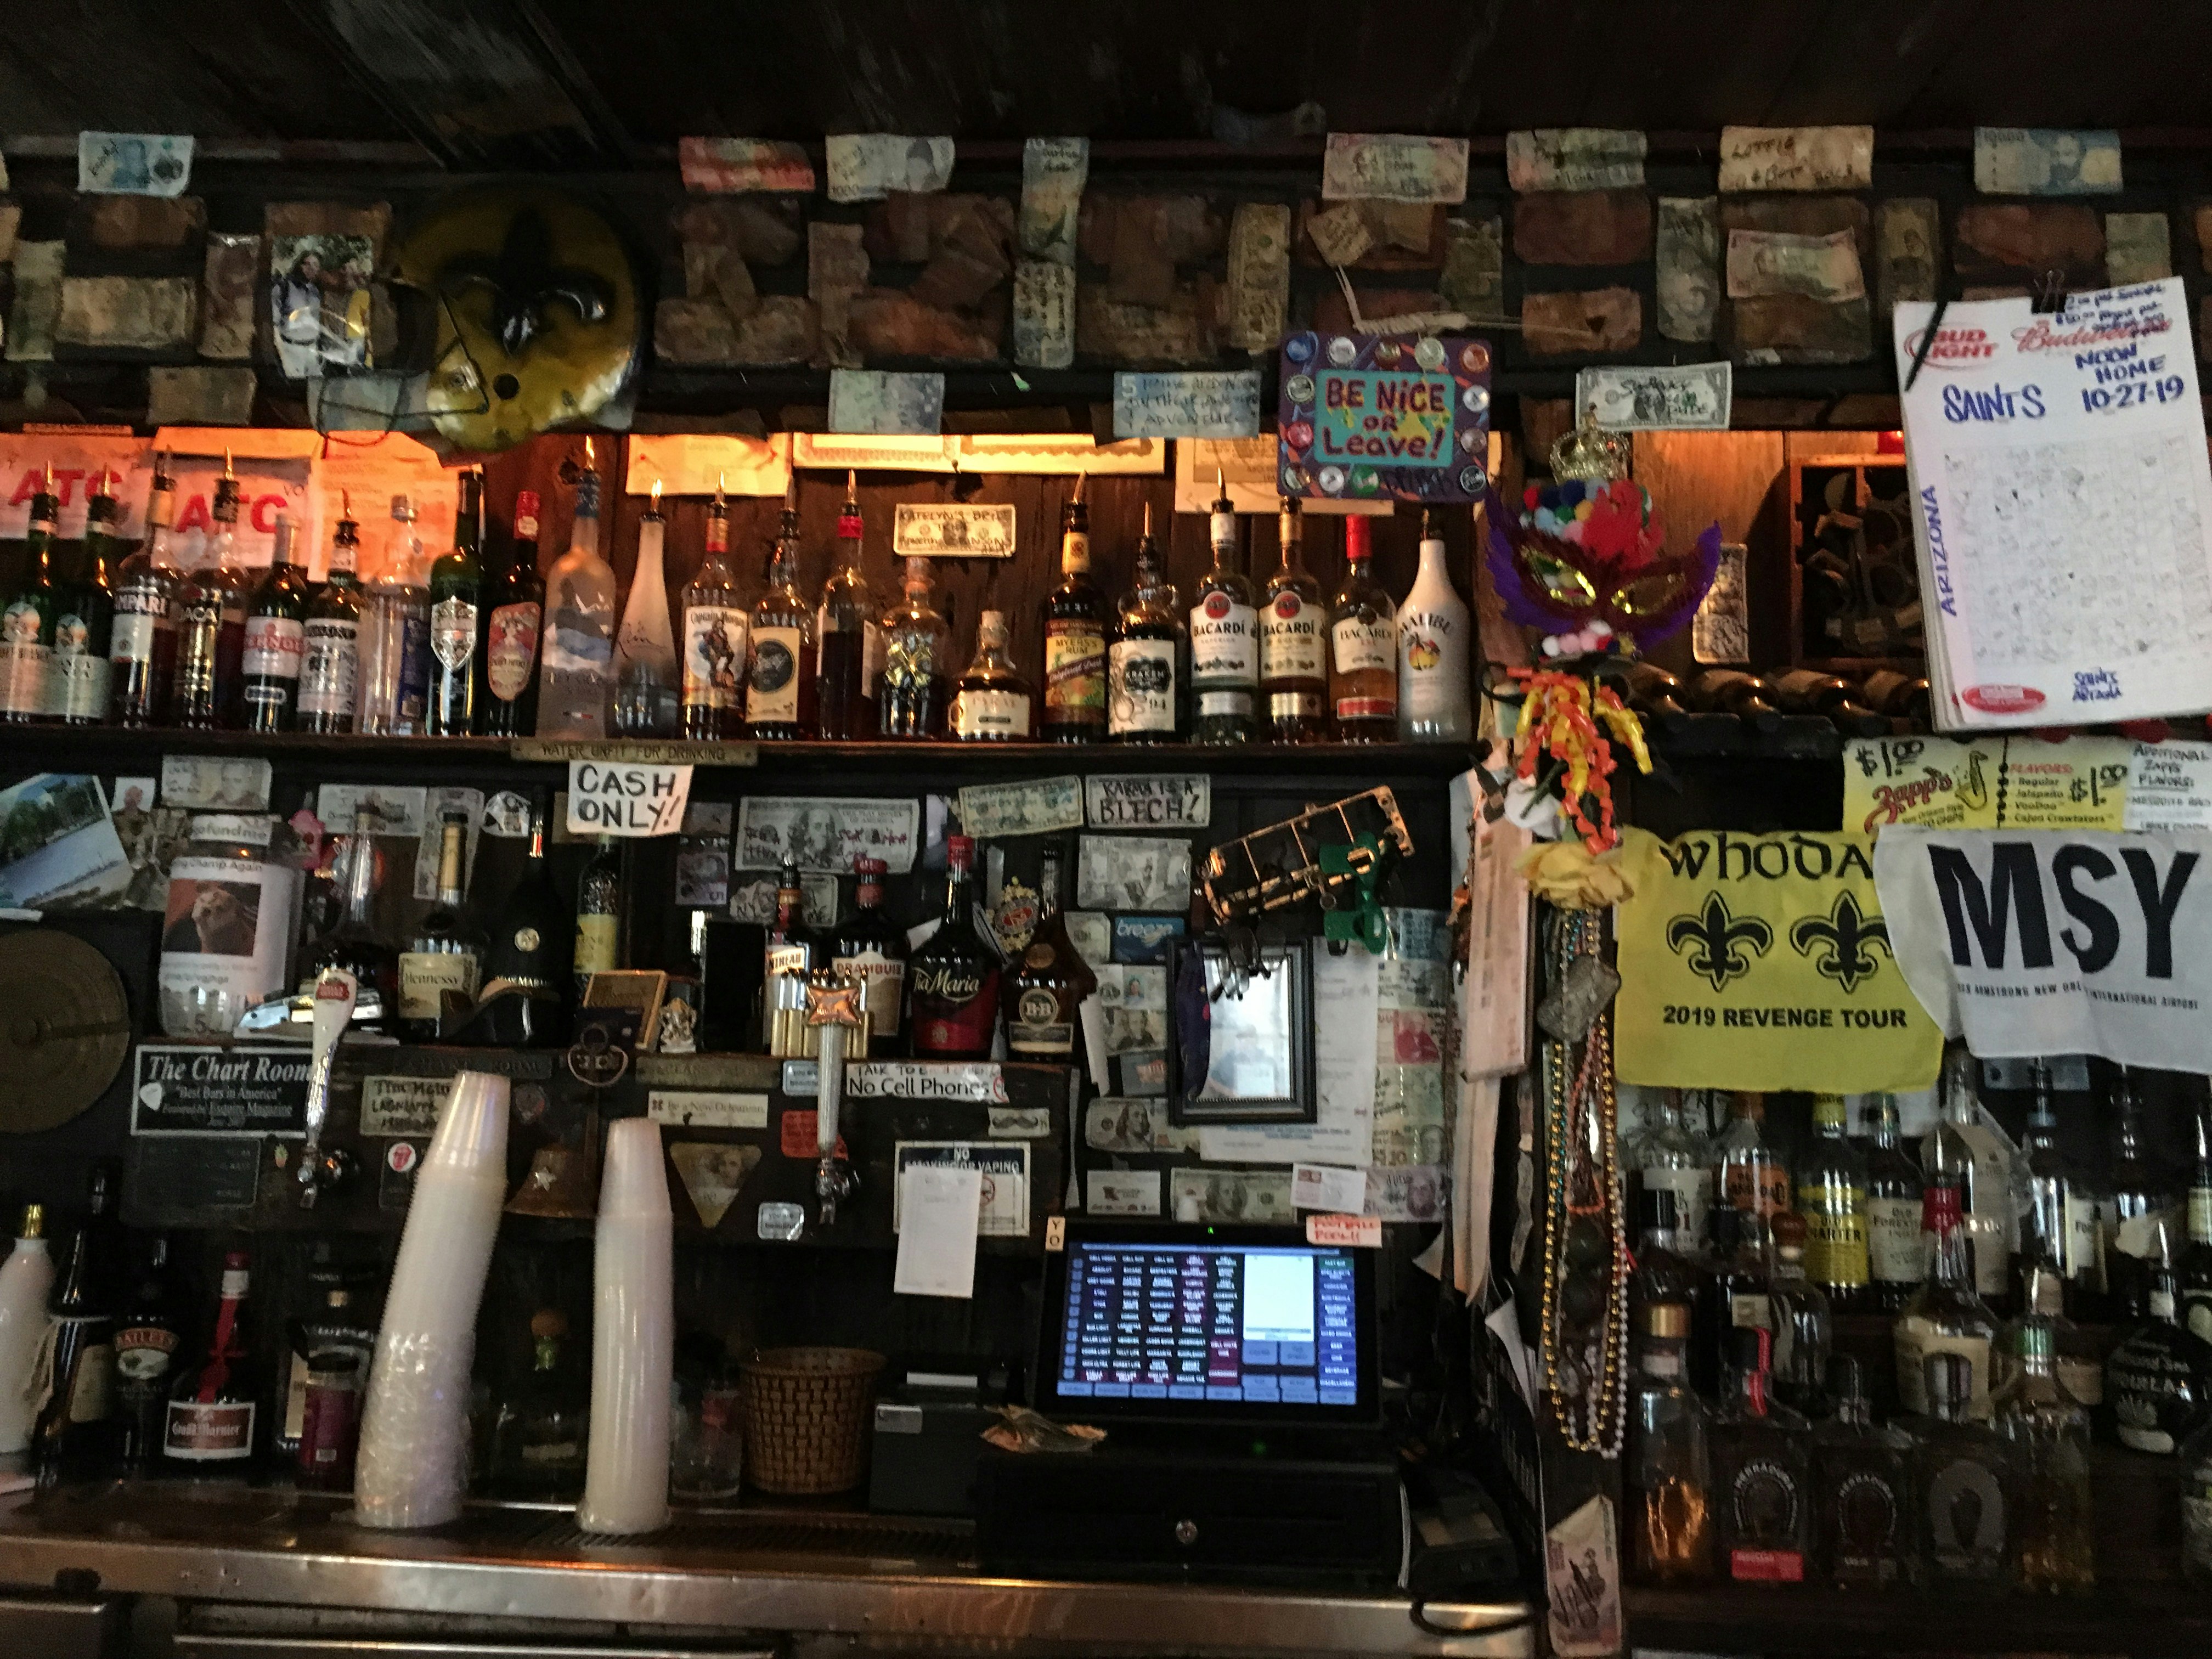 View behind the bar at the Chart Room. Shelved are filled with multiple bottles of alcohol and covered in different currencies, Mardi Gras masks and beads. A cash register is off to the left of a stack of plastic cups.  